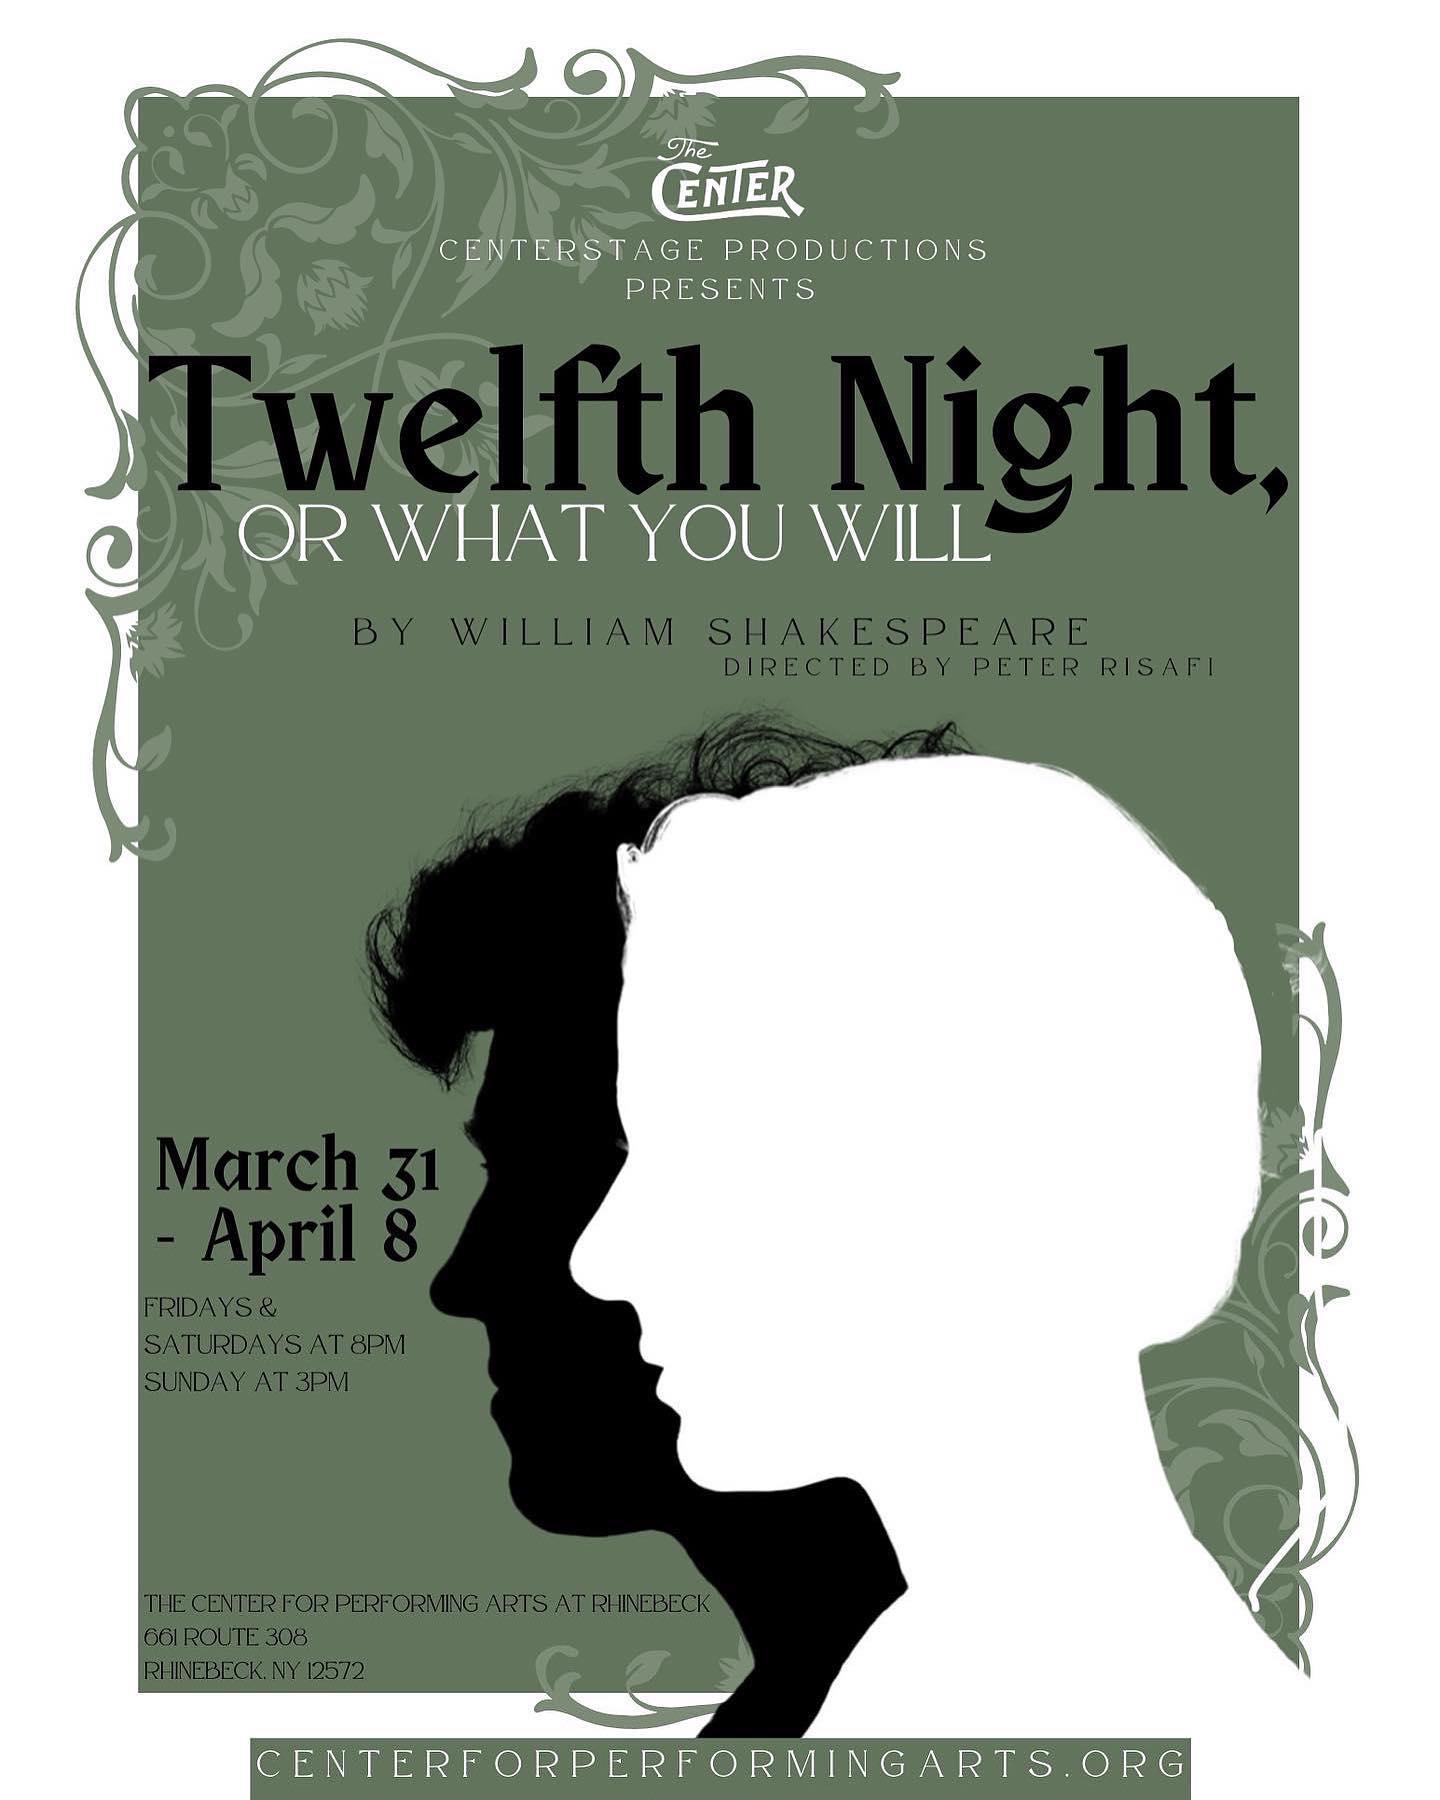 Image of twelfth night play poster used to discuss a memory technique.